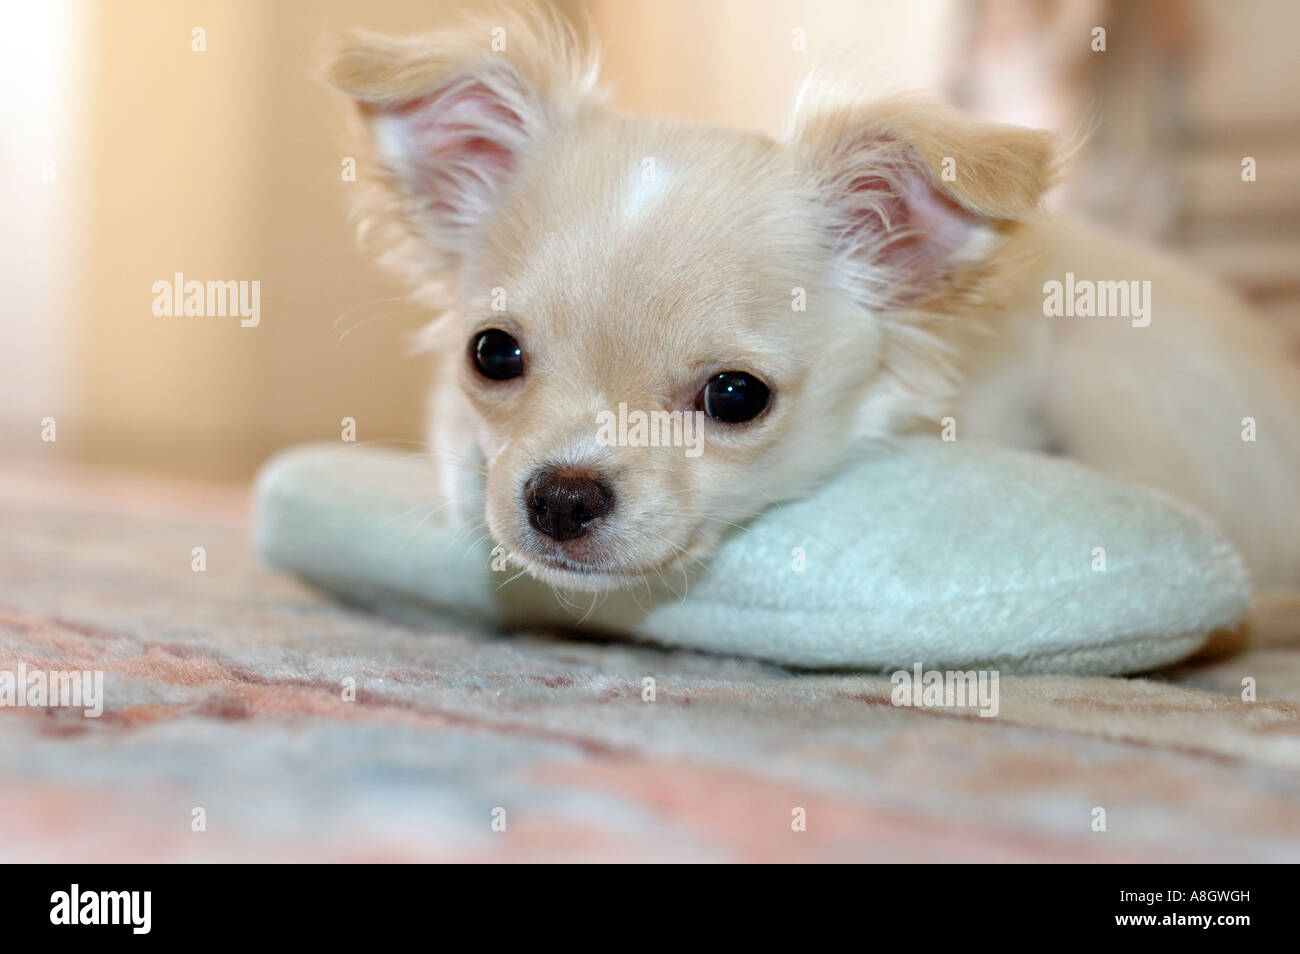 A cute chihuahua puppy resting with his chin on a slipper Stock Photo